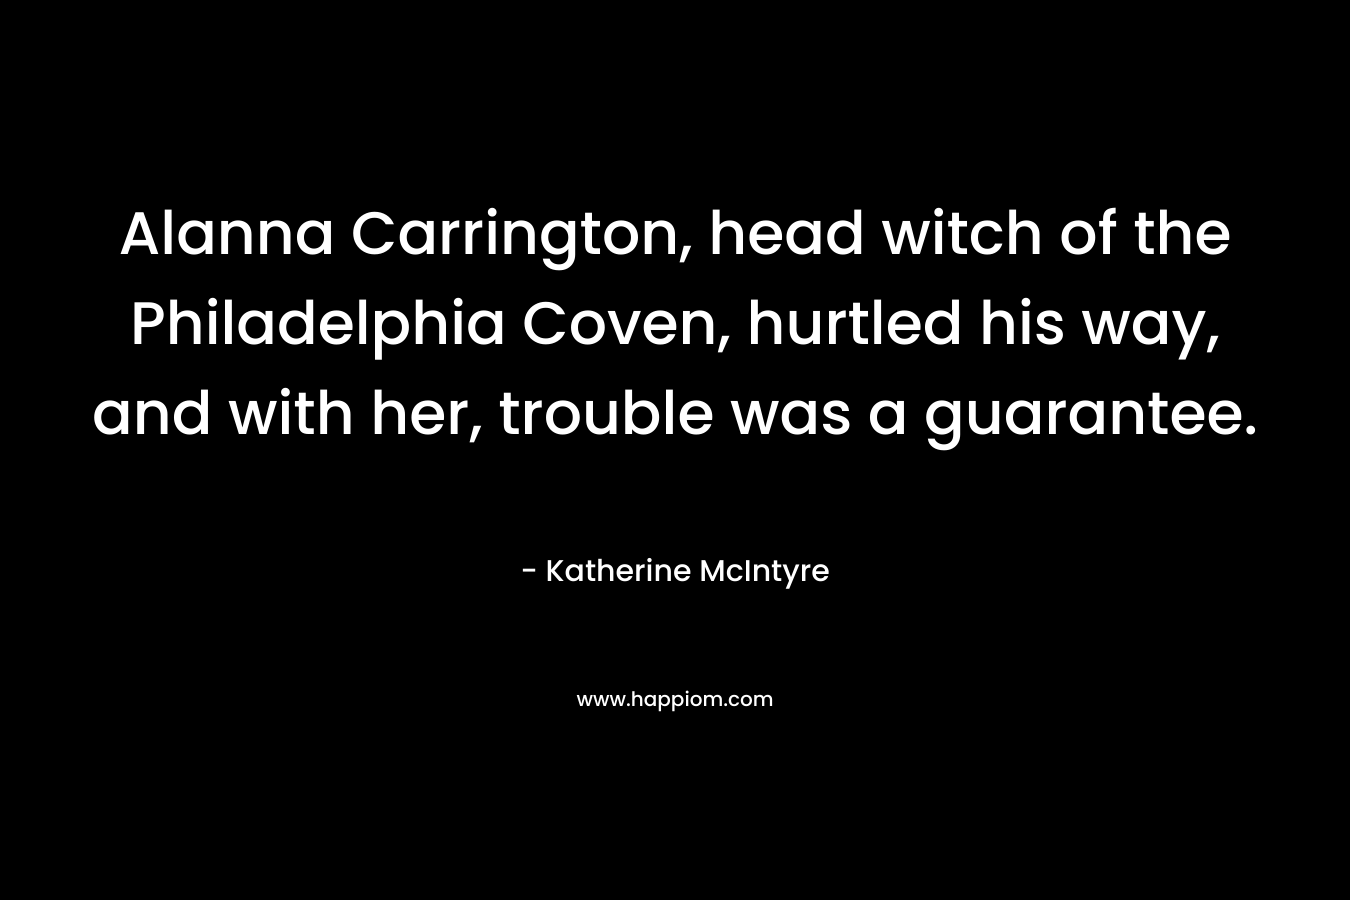 Alanna Carrington, head witch of the Philadelphia Coven, hurtled his way, and with her, trouble was a guarantee.